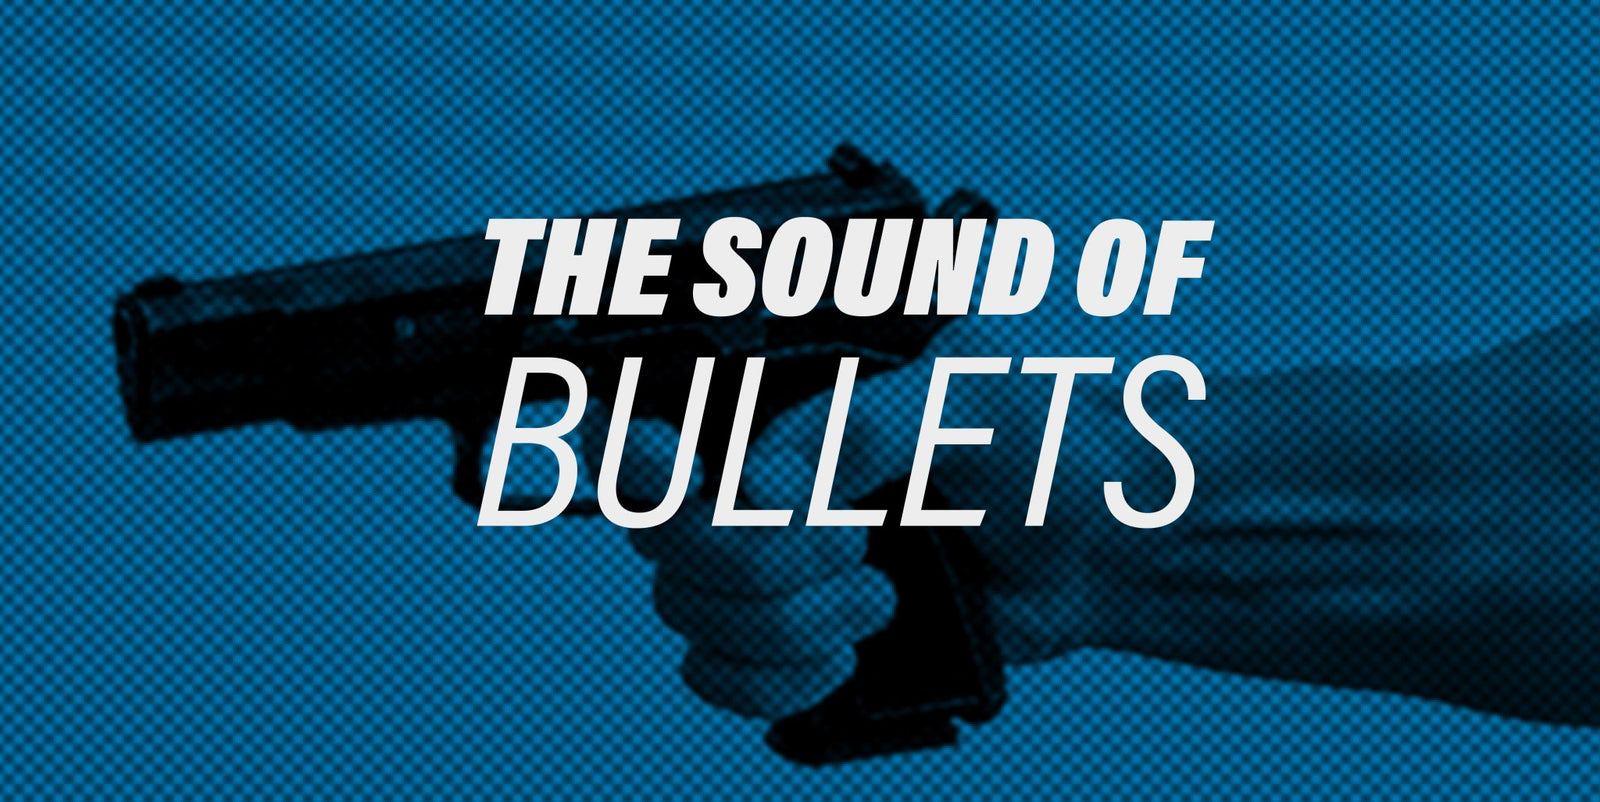 The Sound of Bullets - Tucker® USA